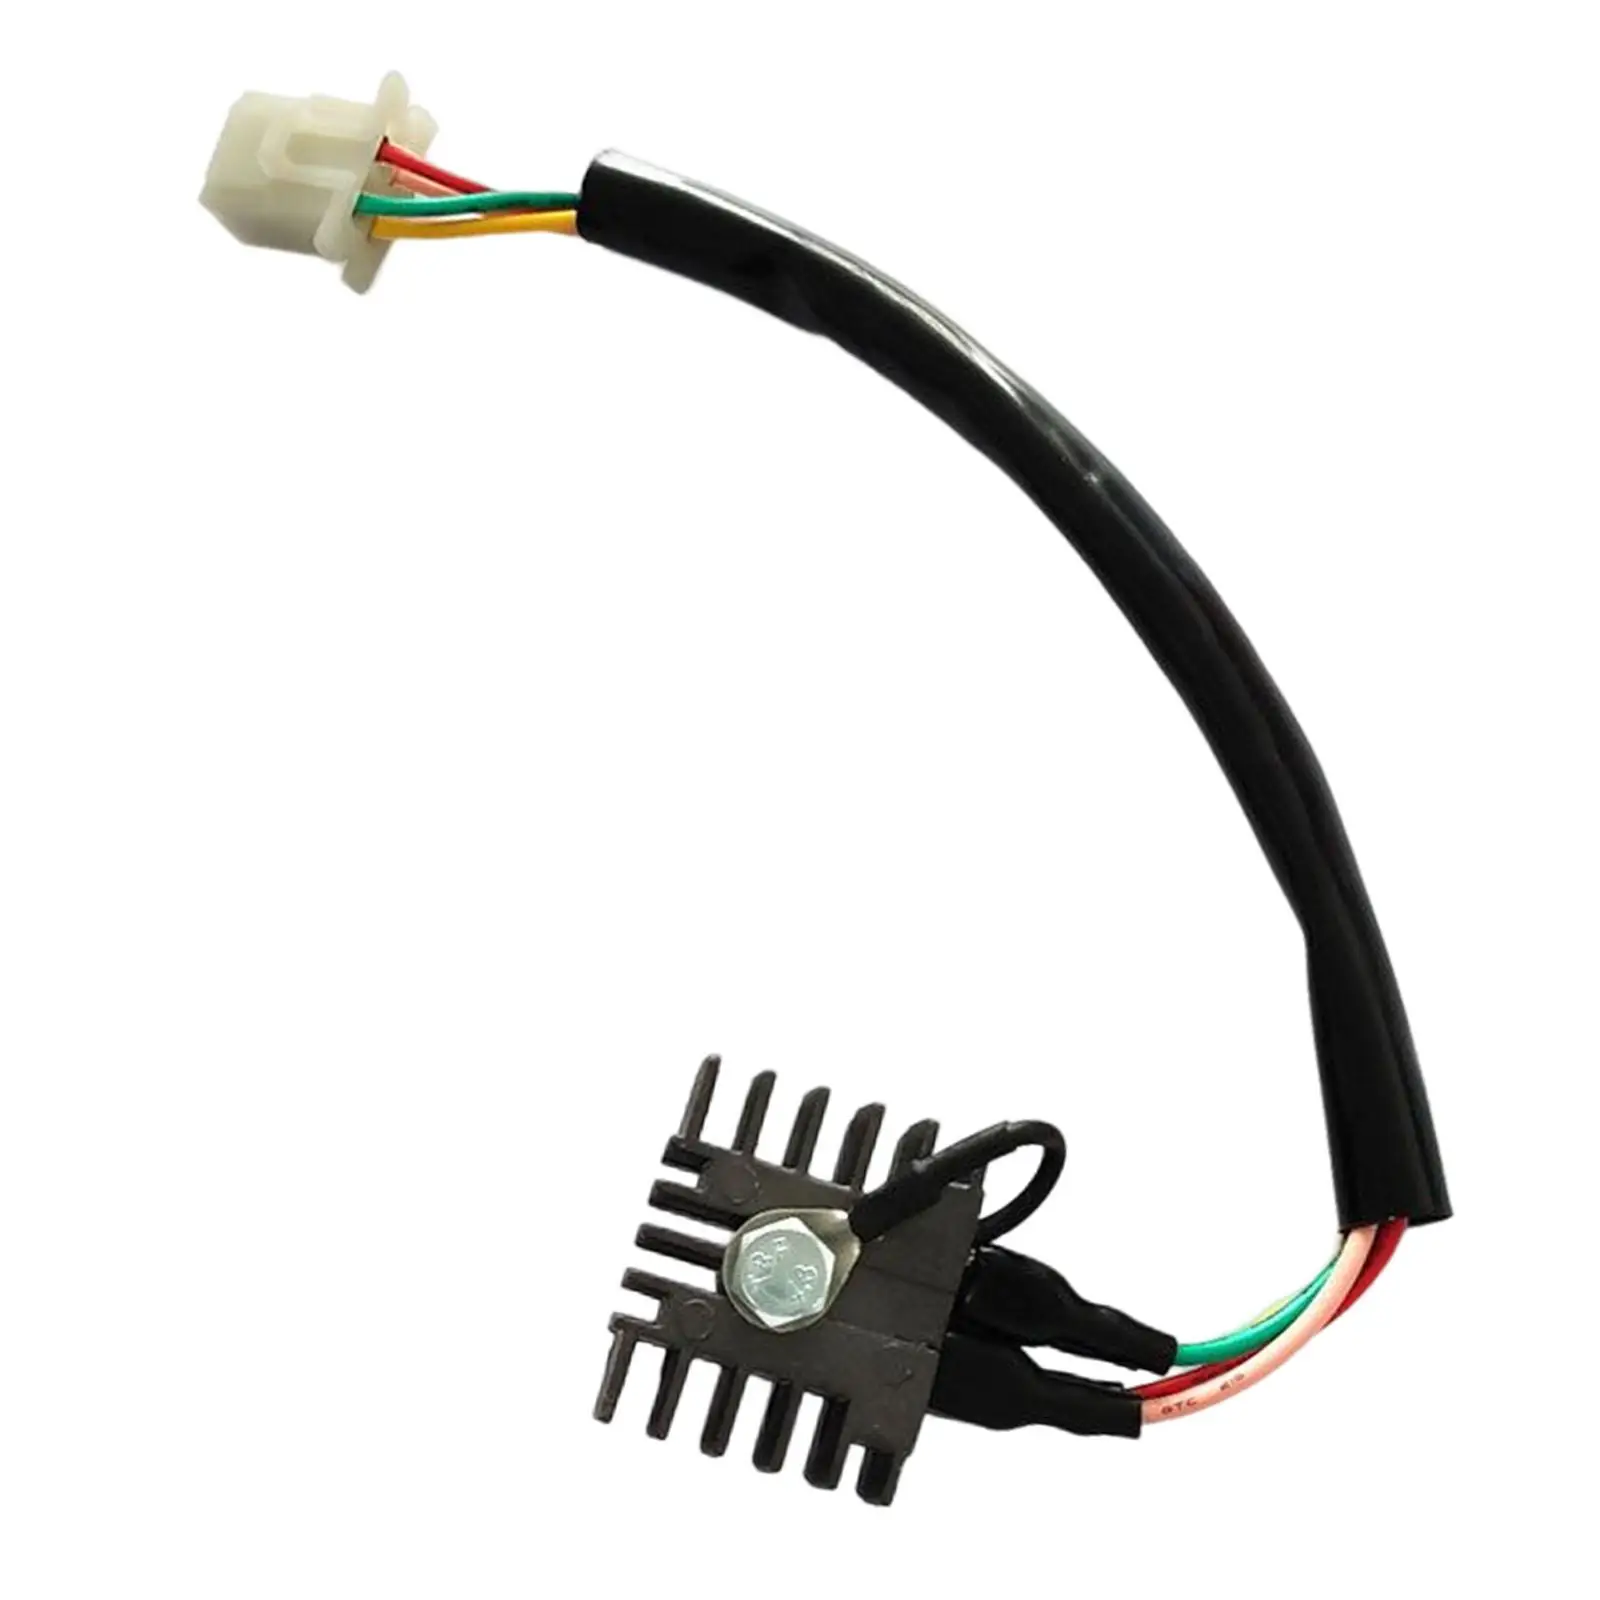 Voltage Regulator Replacement Fits for MT250 CB350 SL Motorbikes Supplies Motorcycle Parts